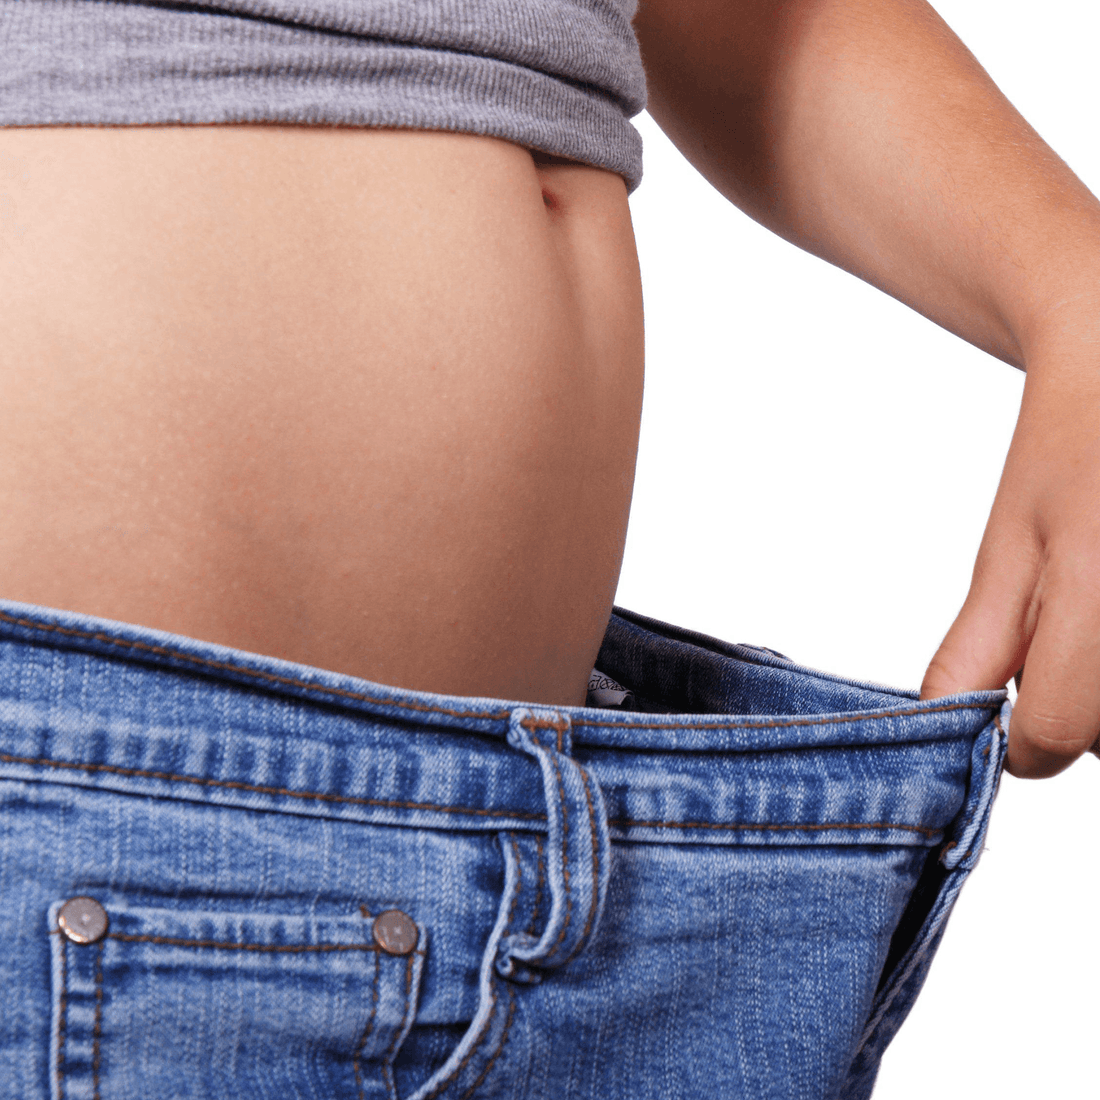 Weight fluctuation - How to manage it! - Fitness Health 